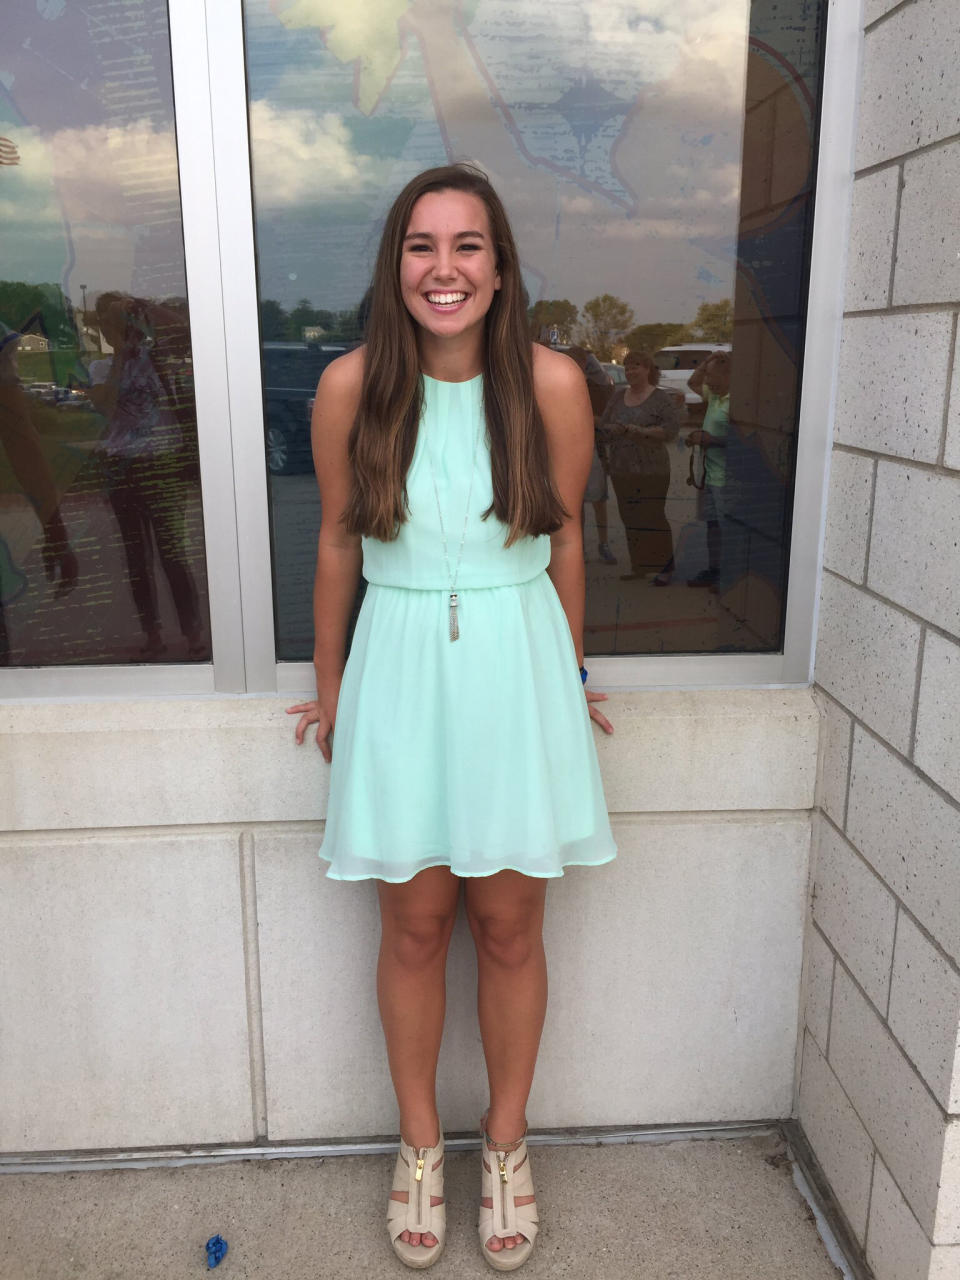 Mollie Tibbetts poses for a picture in September 2016 during Homecoming festivities at BGM High School in her hometown of Brooklyn, Iowa. Cristhian Bahena Rivera, the man charged with killing Tibbetts while she was out for a run in July 2018, will stand trial for first-degree murder on Monday, May 17 in Davenport, Iowa. (Kim Calderwood via AP)